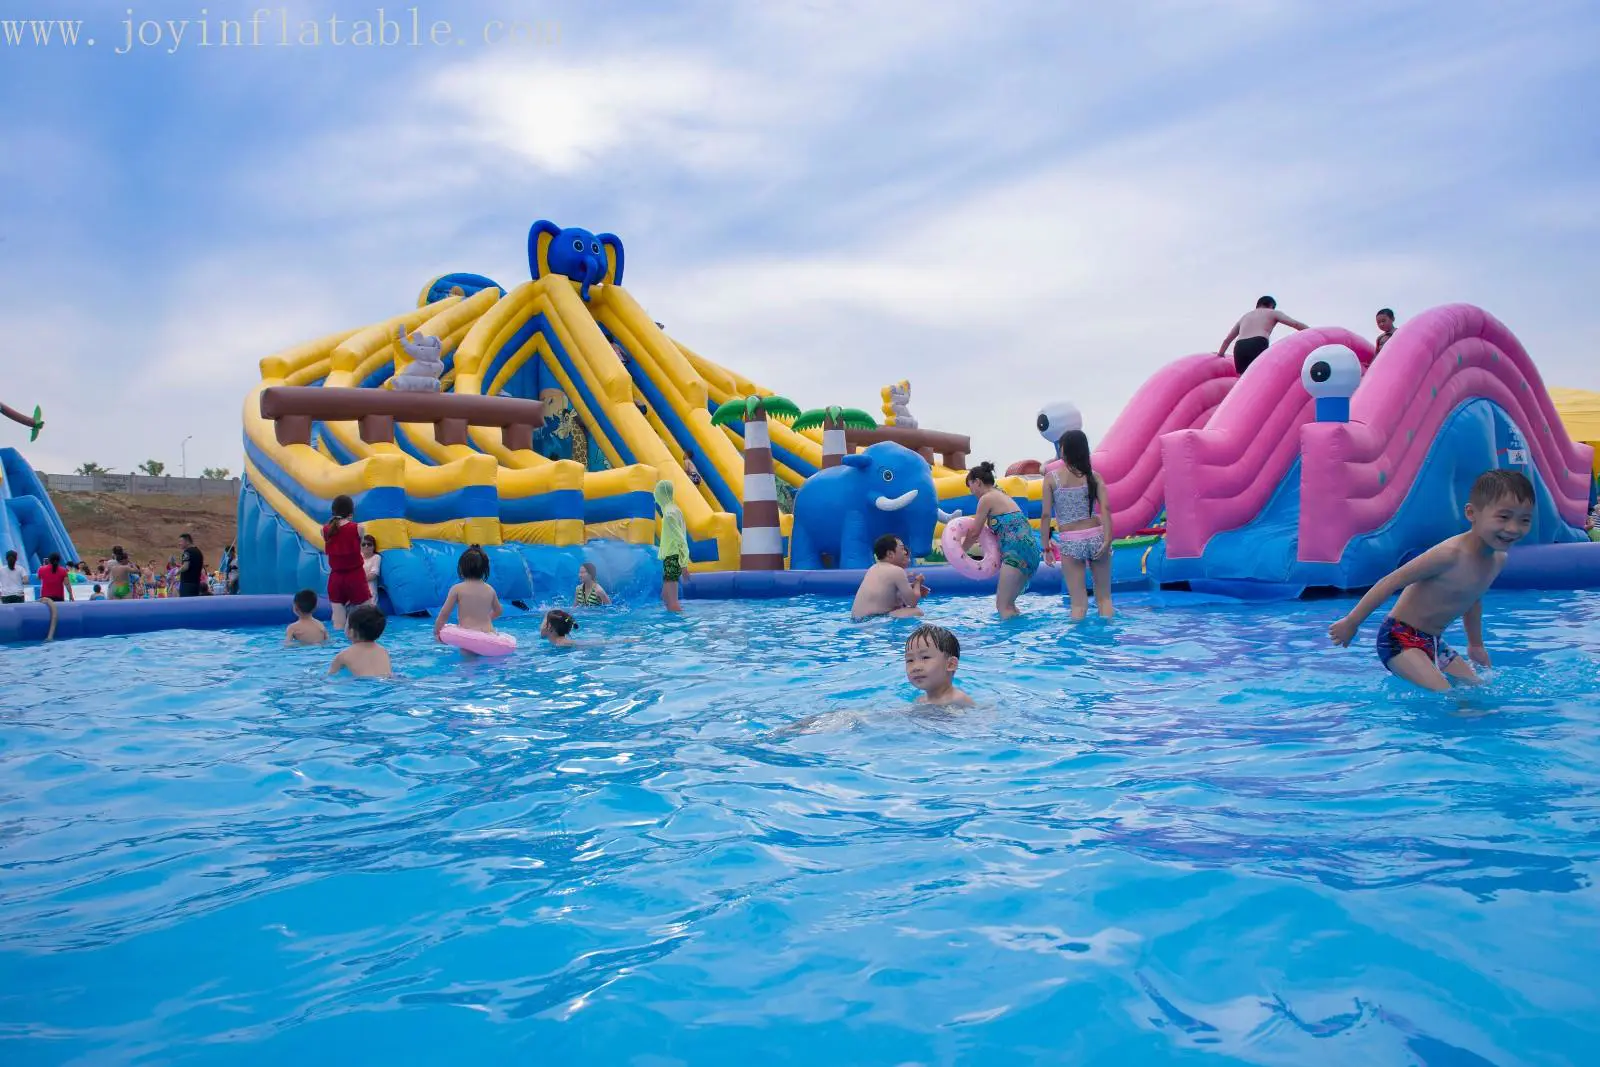 trendy popular inflatable inflatable funcity swimming JOY inflatable